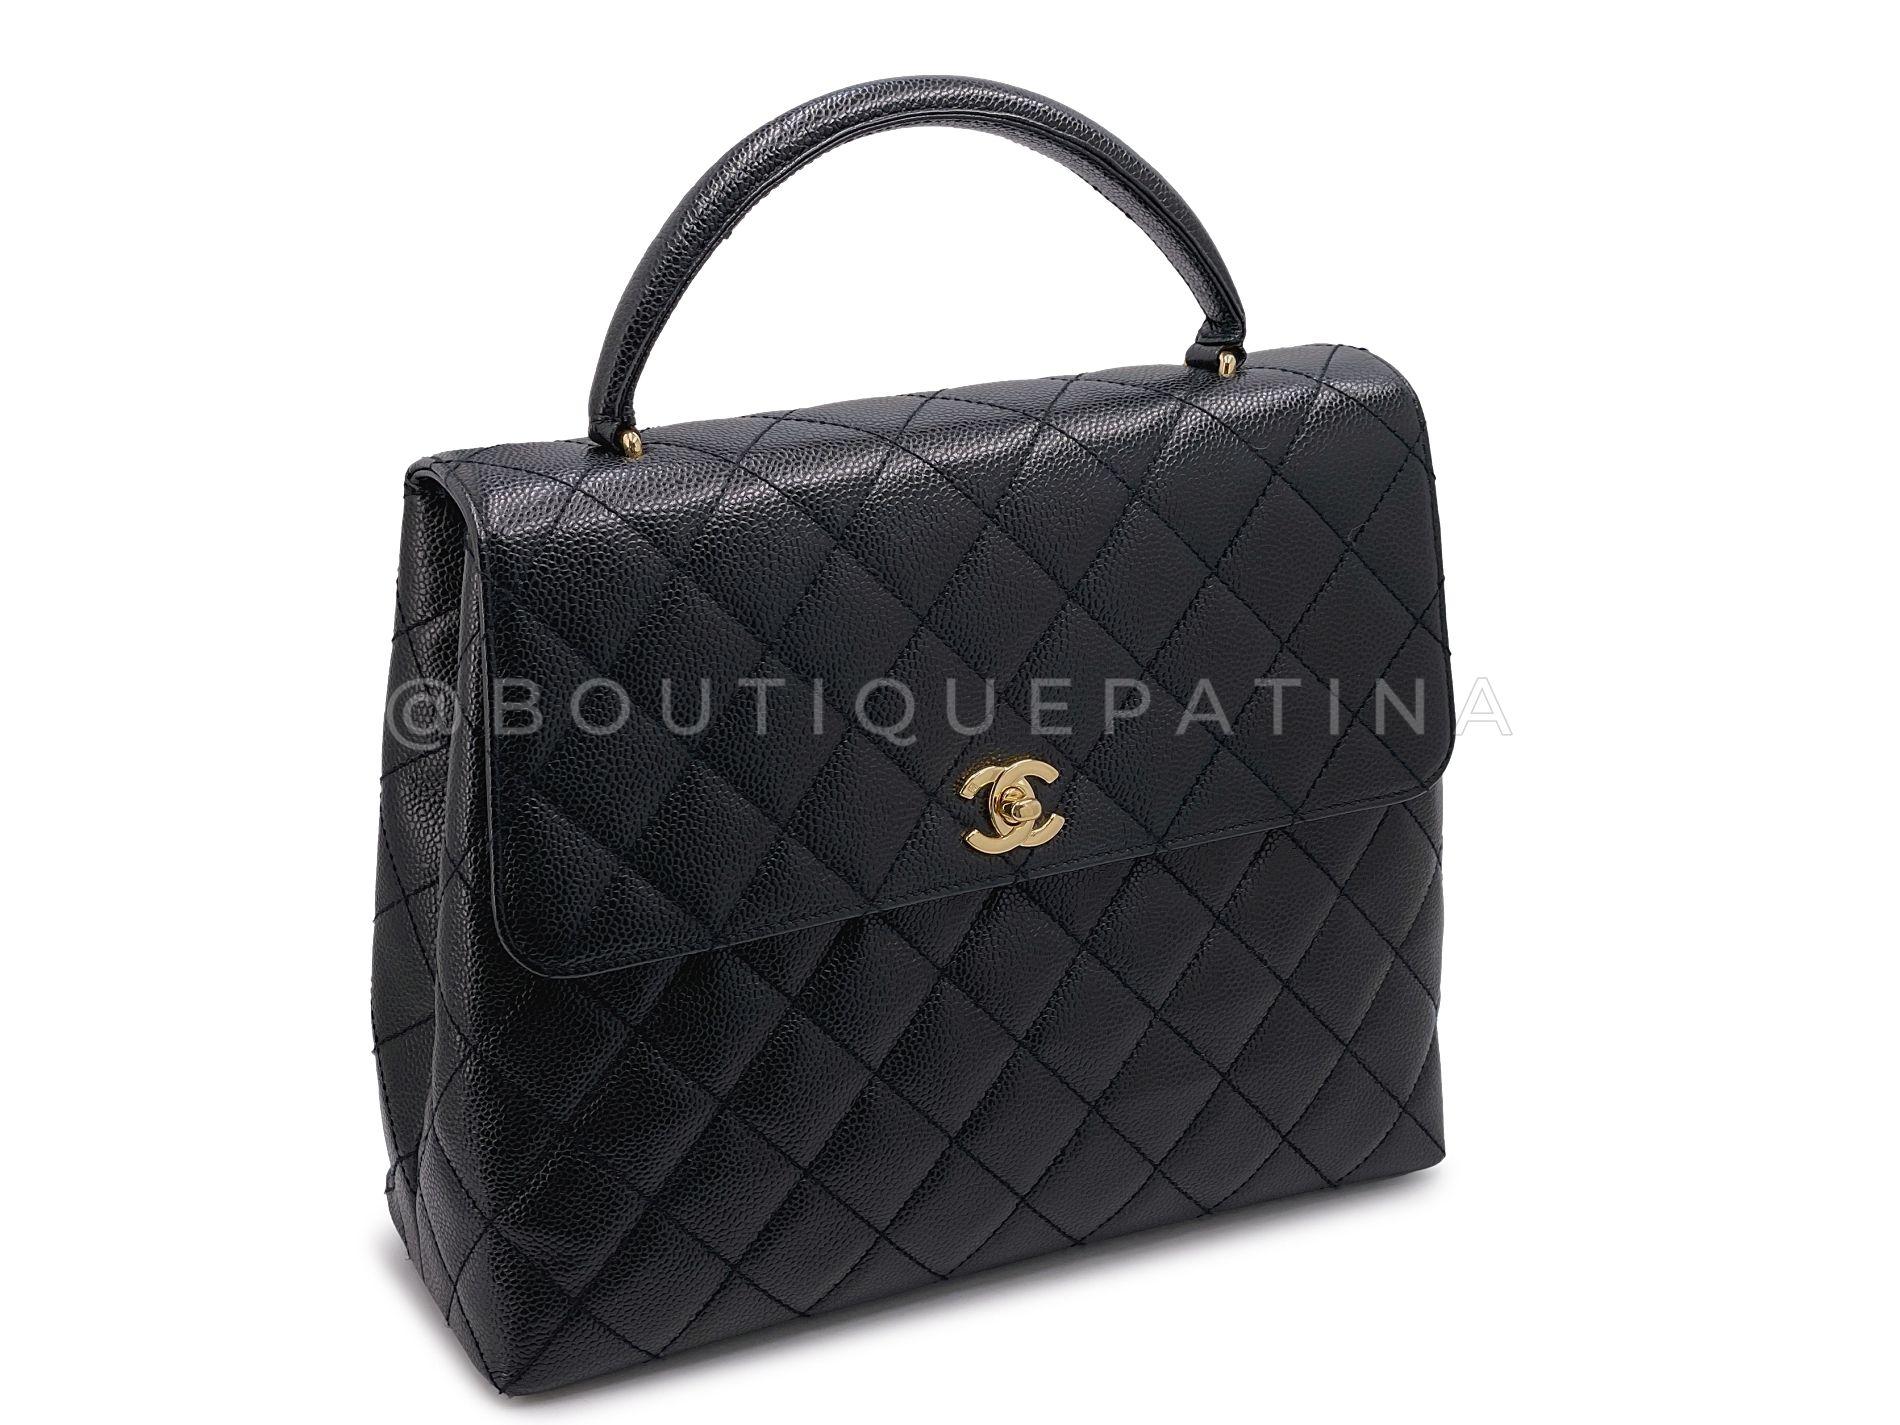 Store item: 68013
For 20 years, Boutique Patina has specialized in sourcing and curating the most pristine vintage and collectible accessories by searching closets around the world.  

Before the Coco Handle and the Trendy CC, Chanel released their